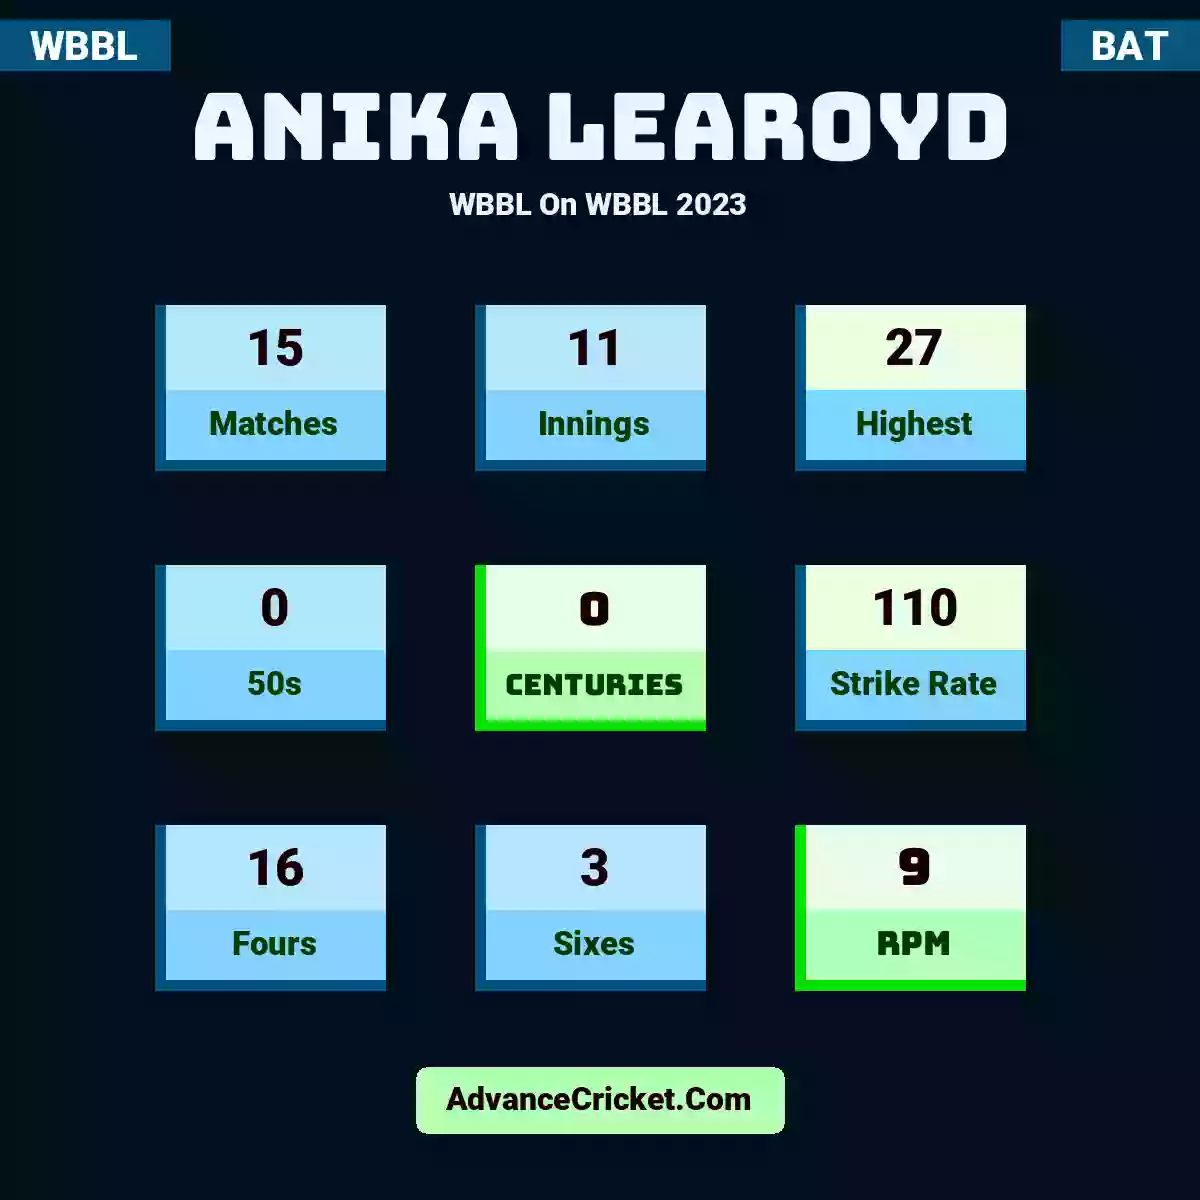 Anika Learoyd WBBL  On WBBL 2023, Anika Learoyd played 15 matches, scored 27 runs as highest, 0 half-centuries, and 0 centuries, with a strike rate of 110. A.Learoyd hit 16 fours and 3 sixes, with an RPM of 9.